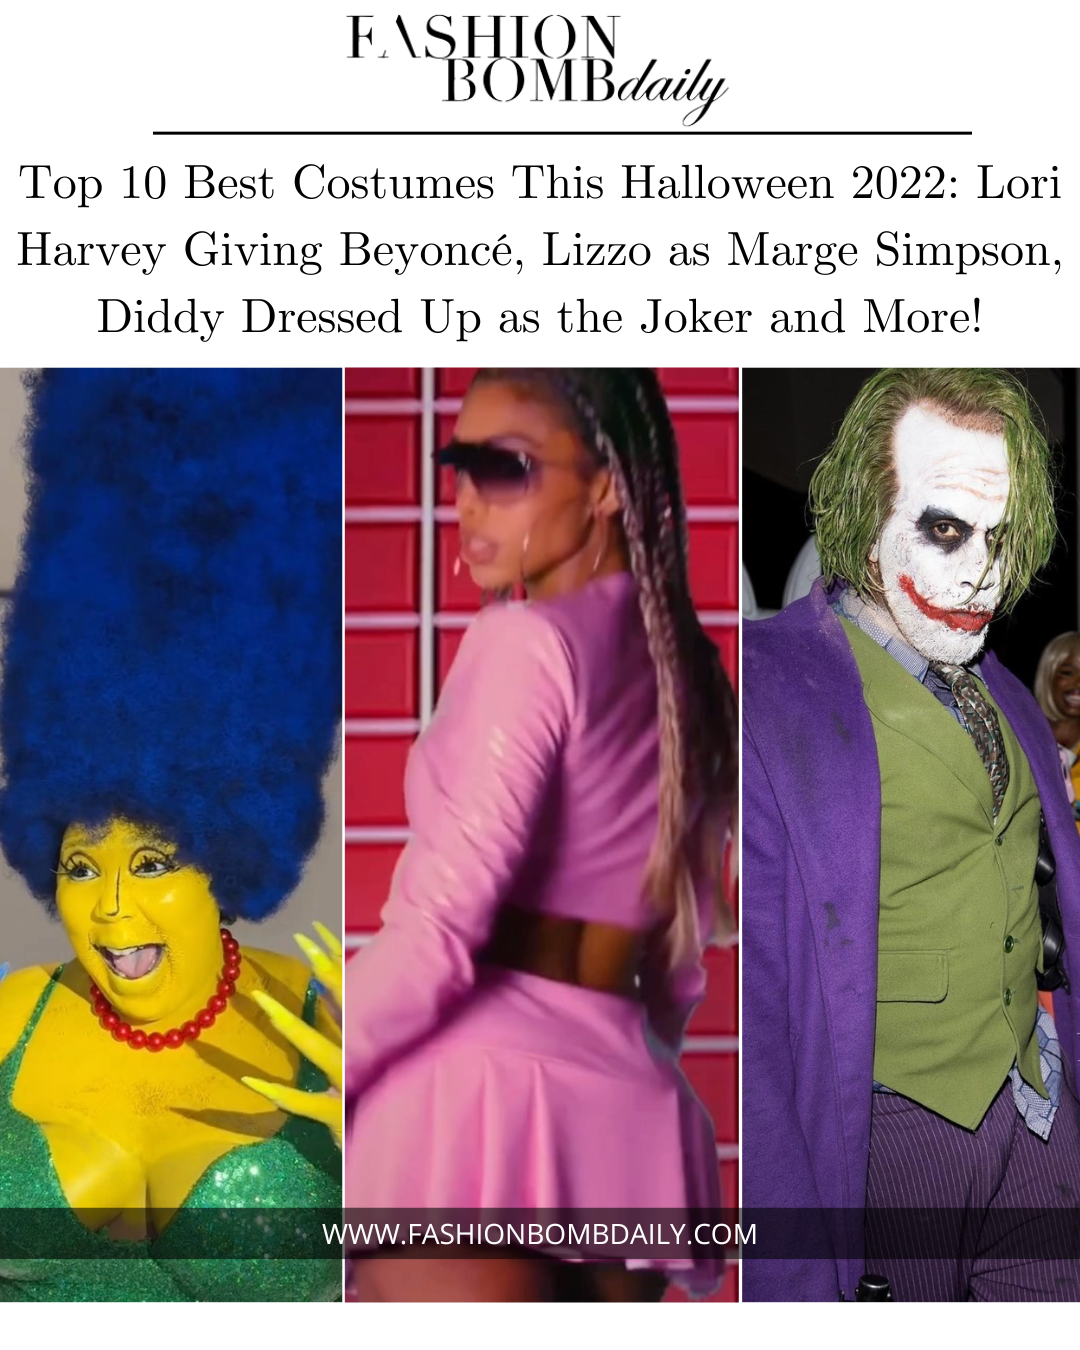 Lori Harvey Giving Beyoncé, Lizzo as Marge Simpson, Diddy Dressed Up as the Joker and More!